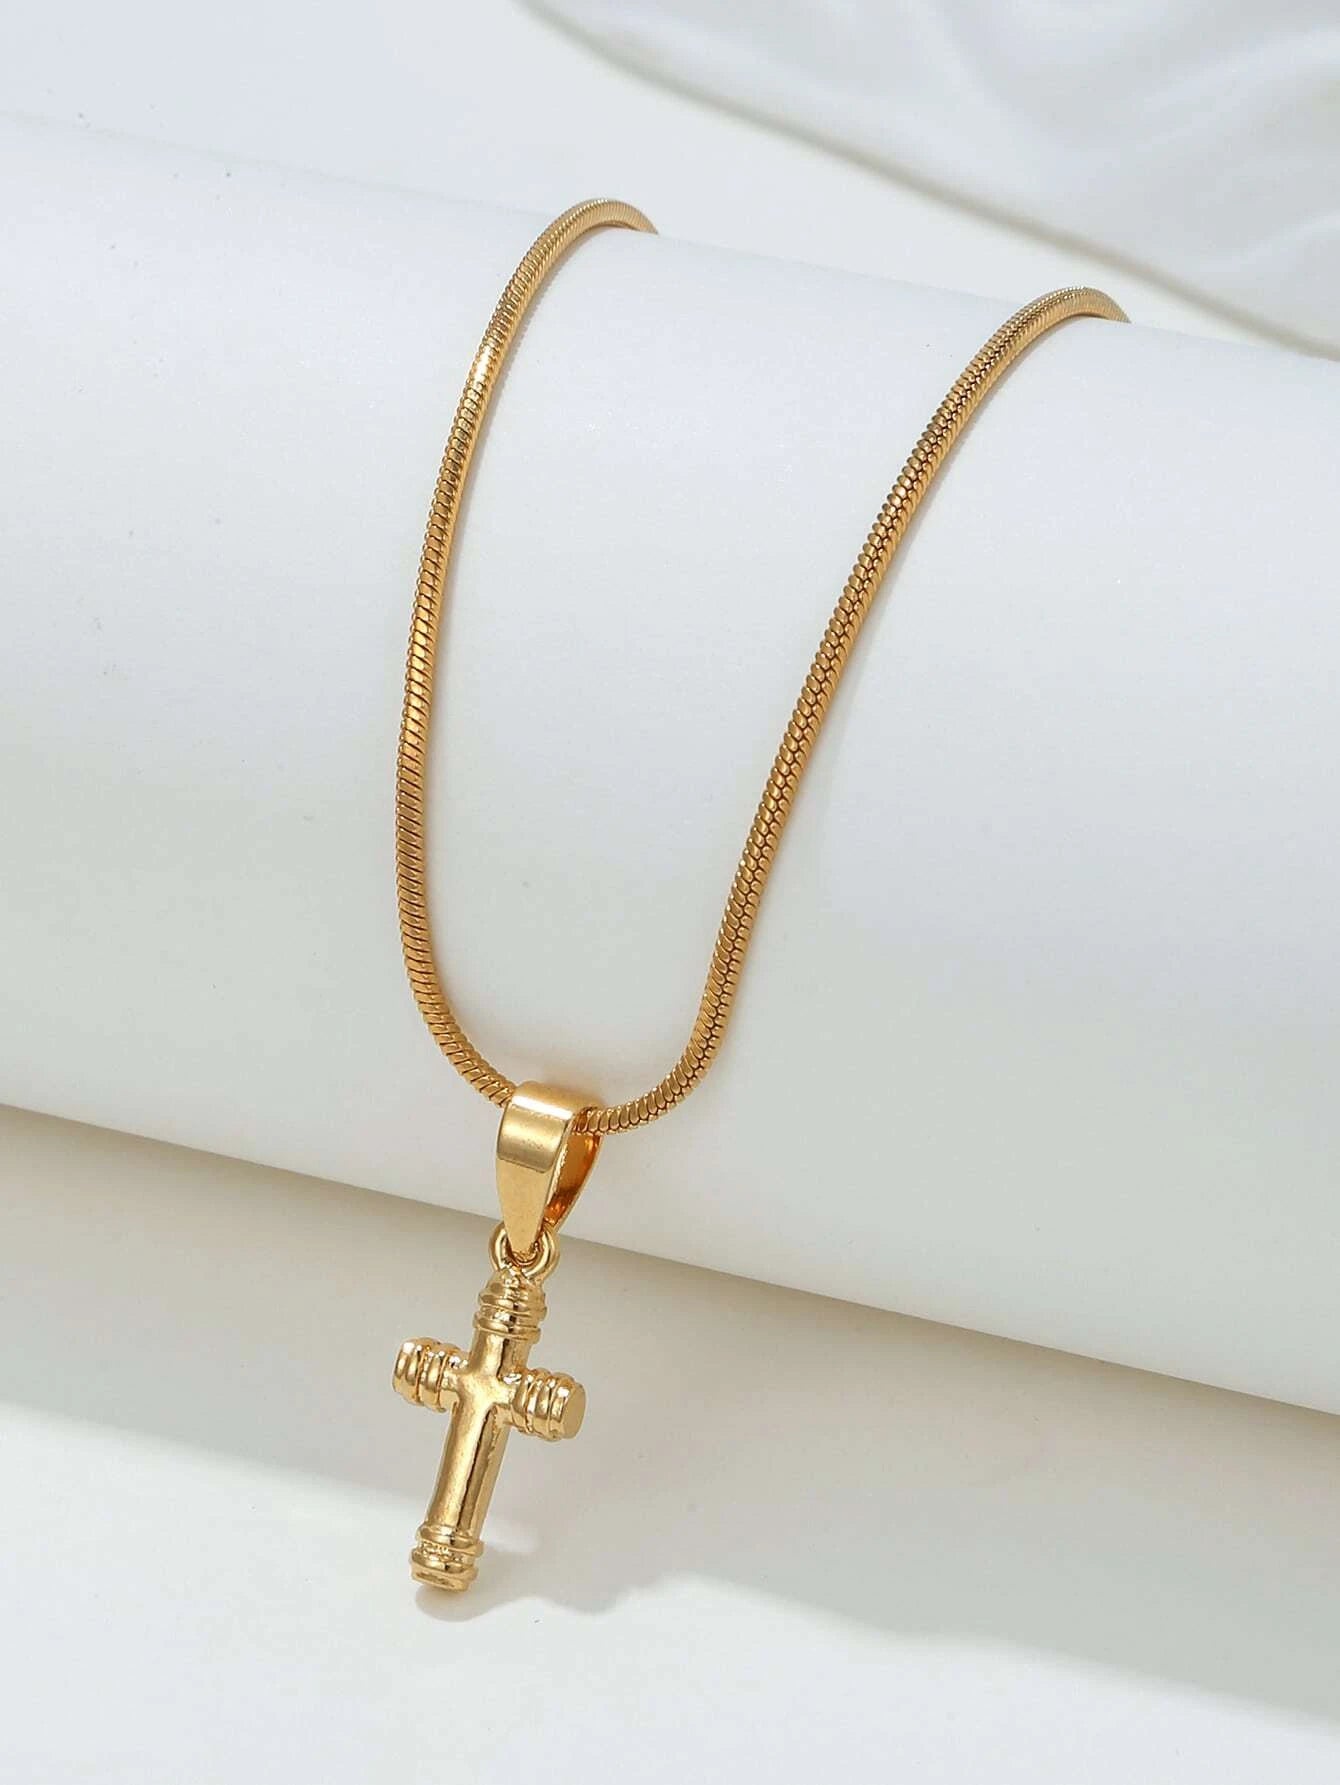 Gold Electroplated Chain and Designer Cross Pendant.